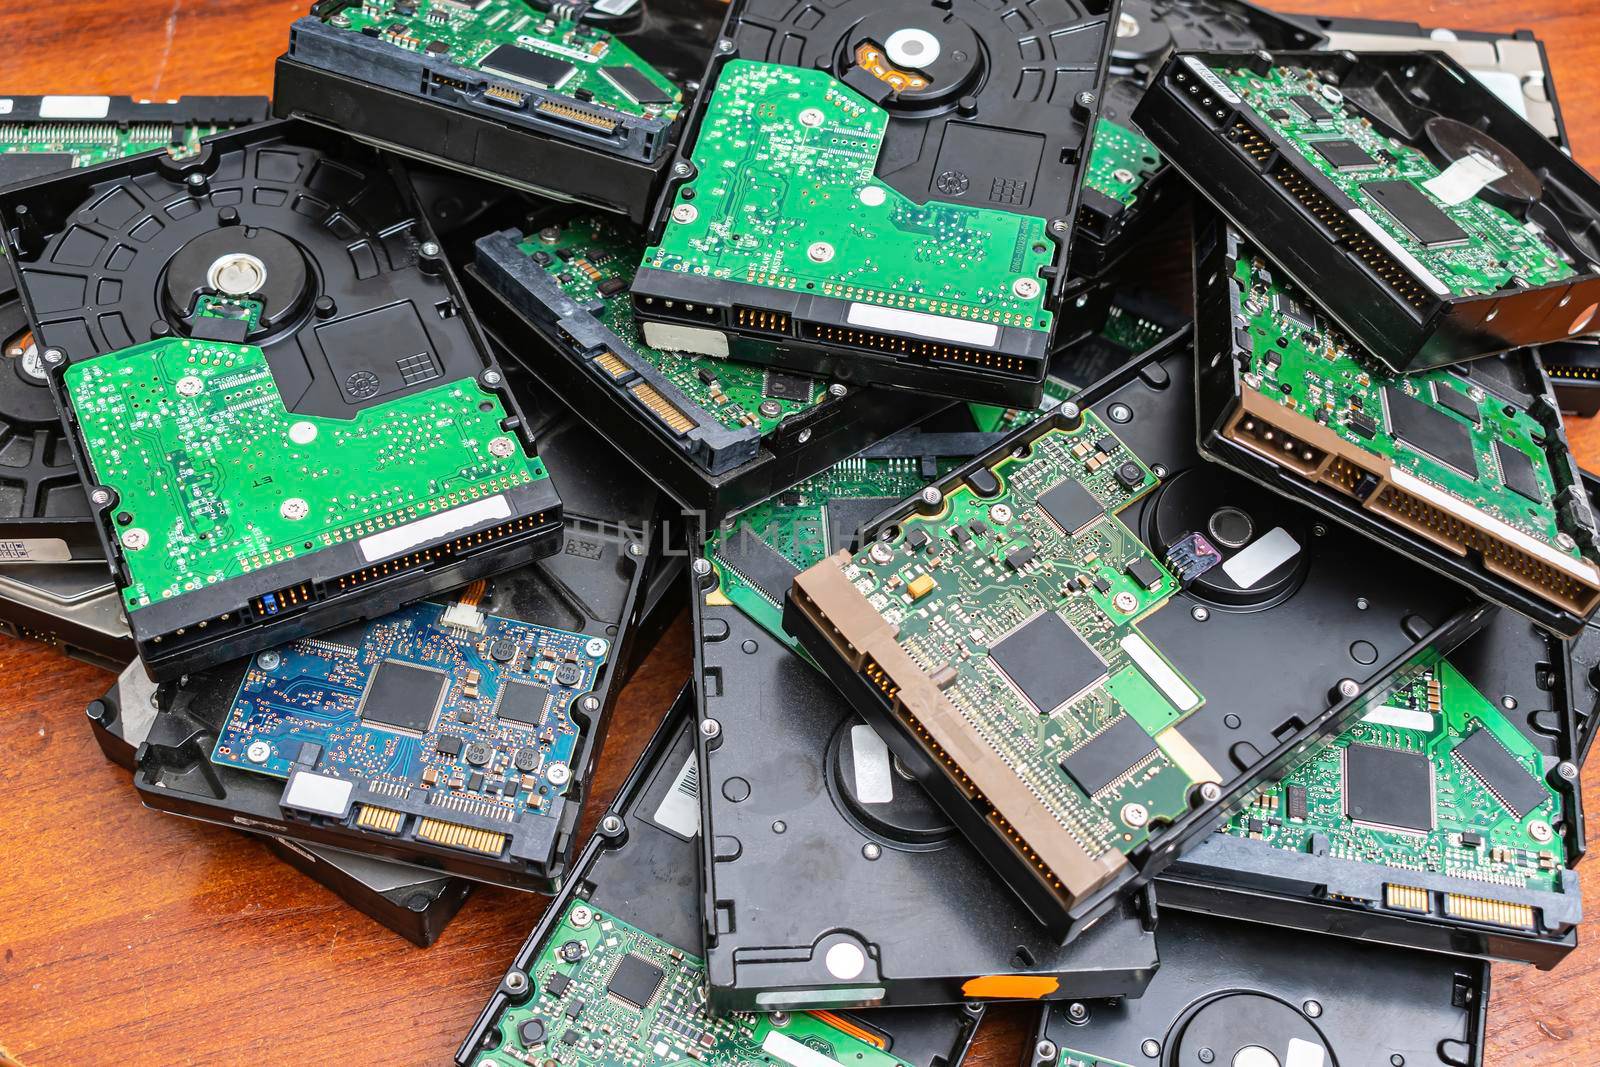 Obsolete hard drives piled up for recycling by Skaron